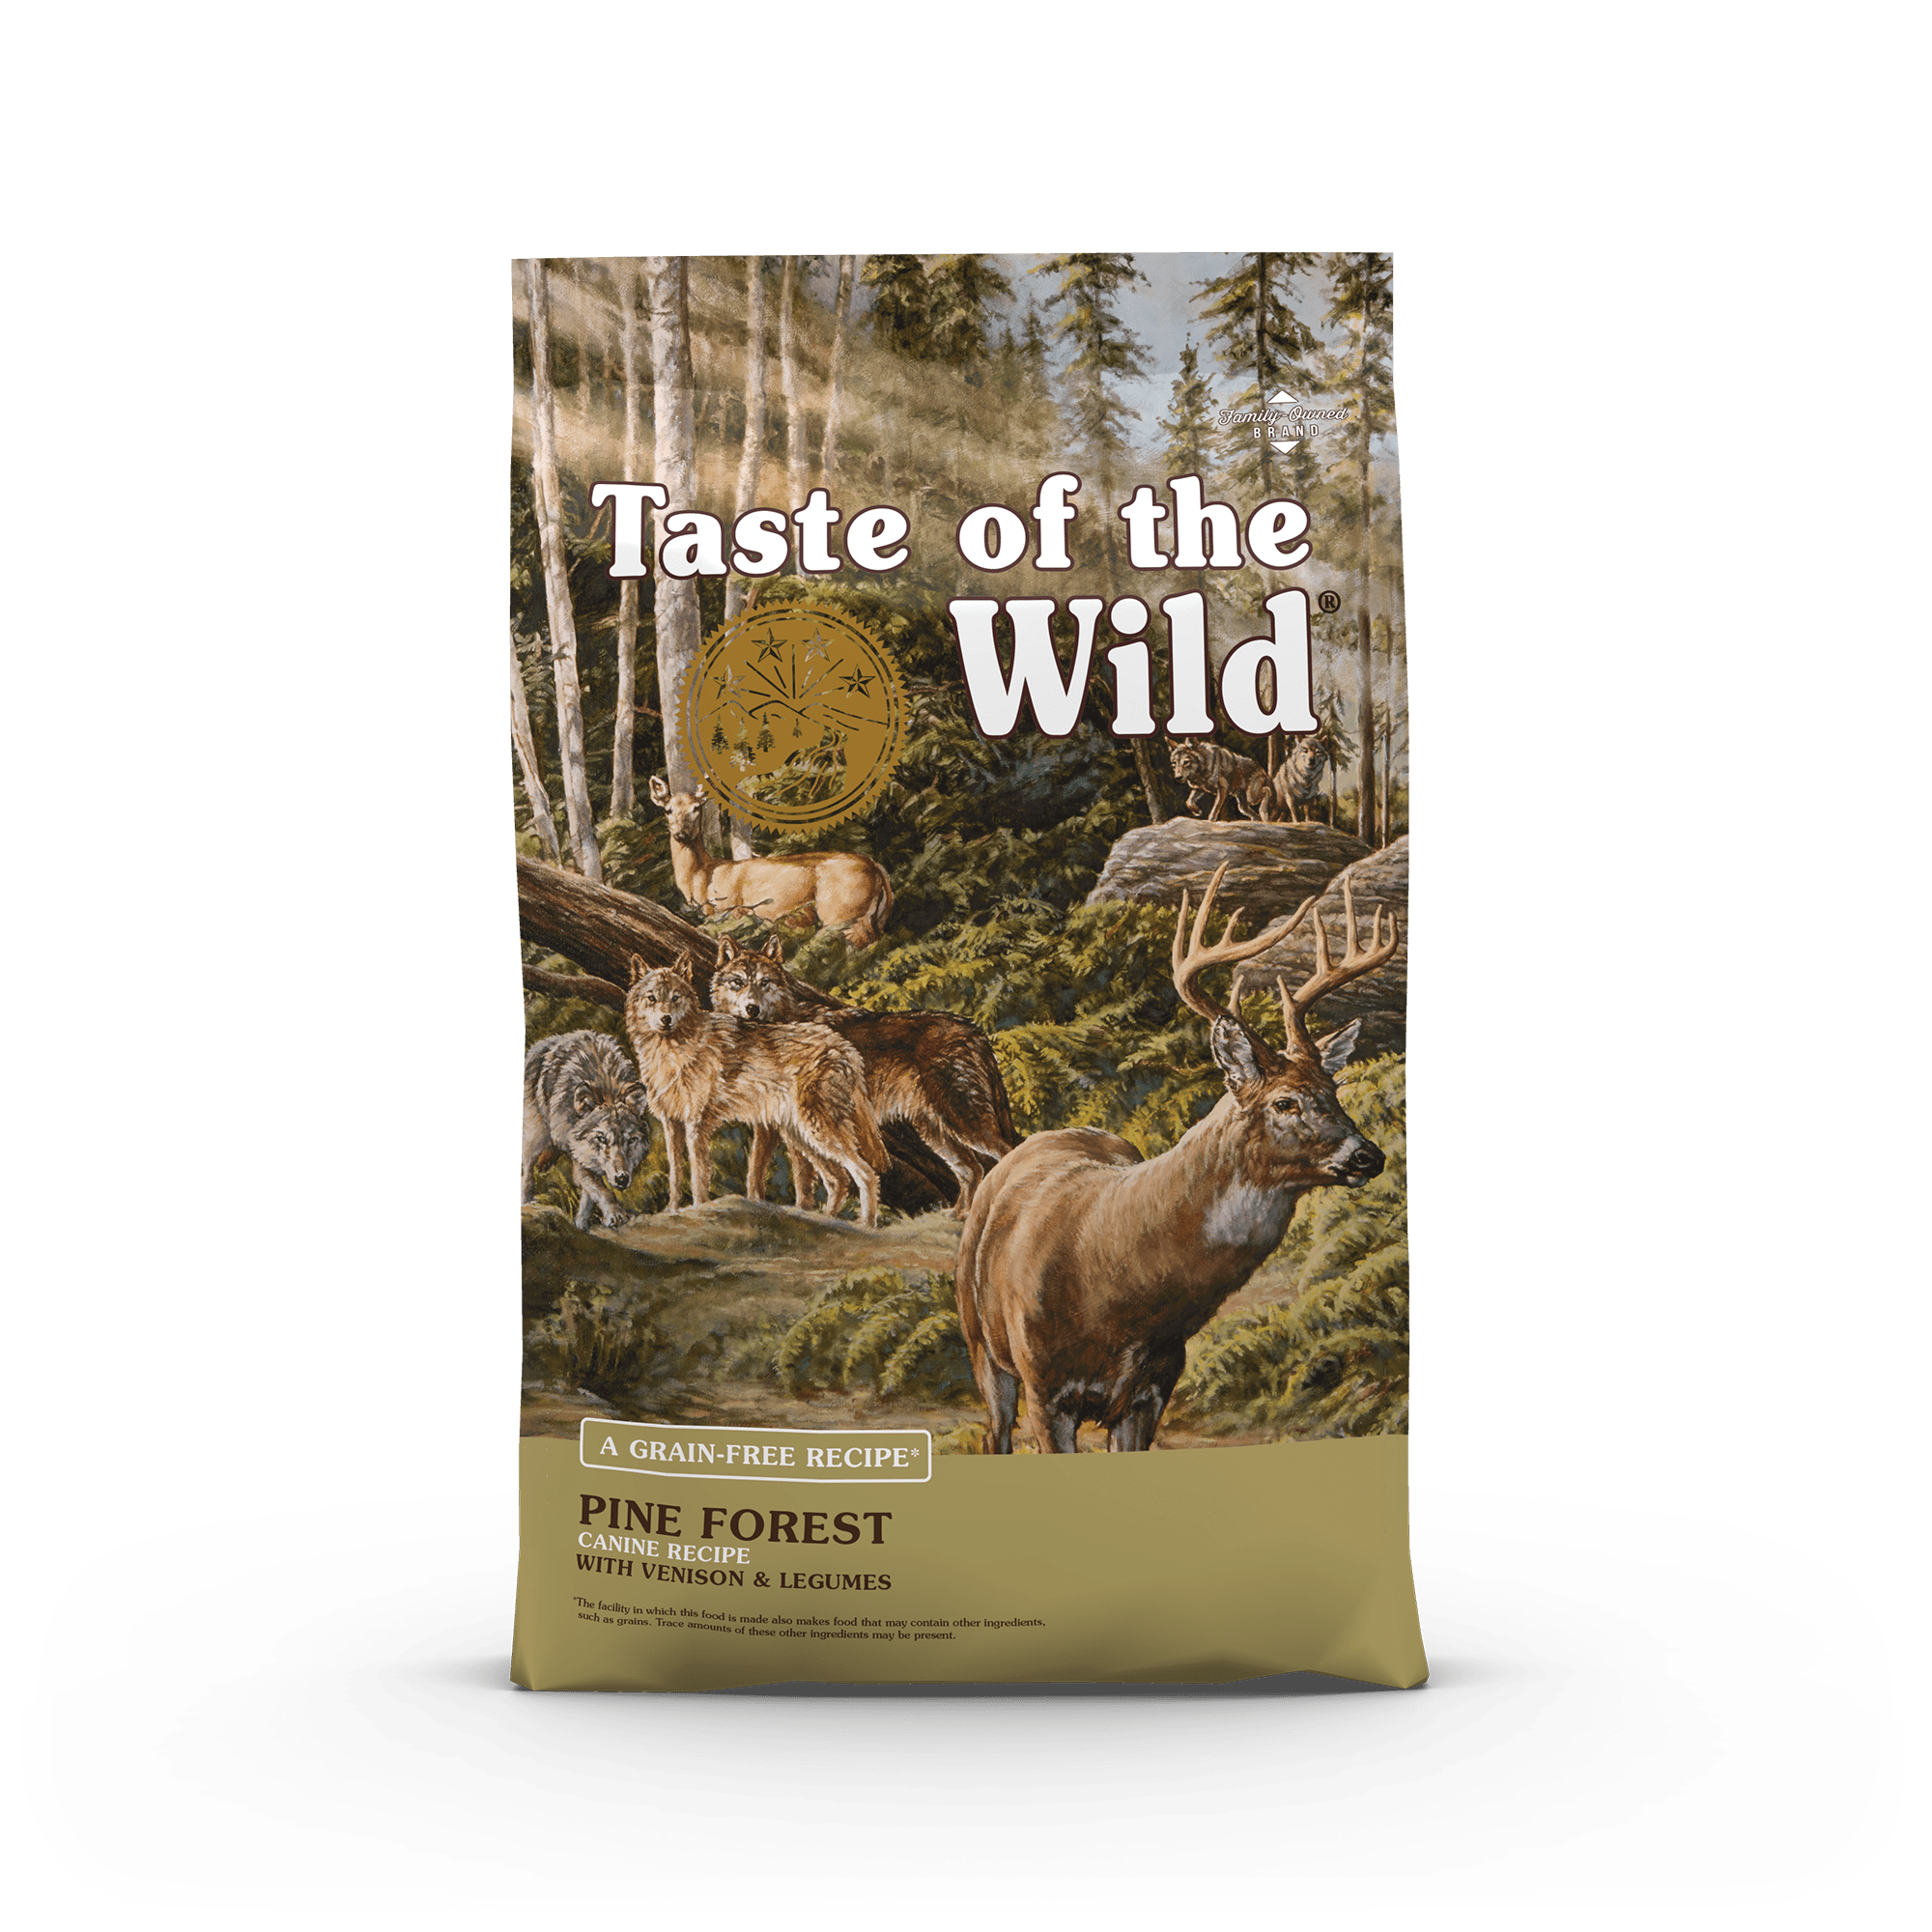 Taste of the Wild Grain-Free Pine Forest Canine Recipe with Venison & Legumes package